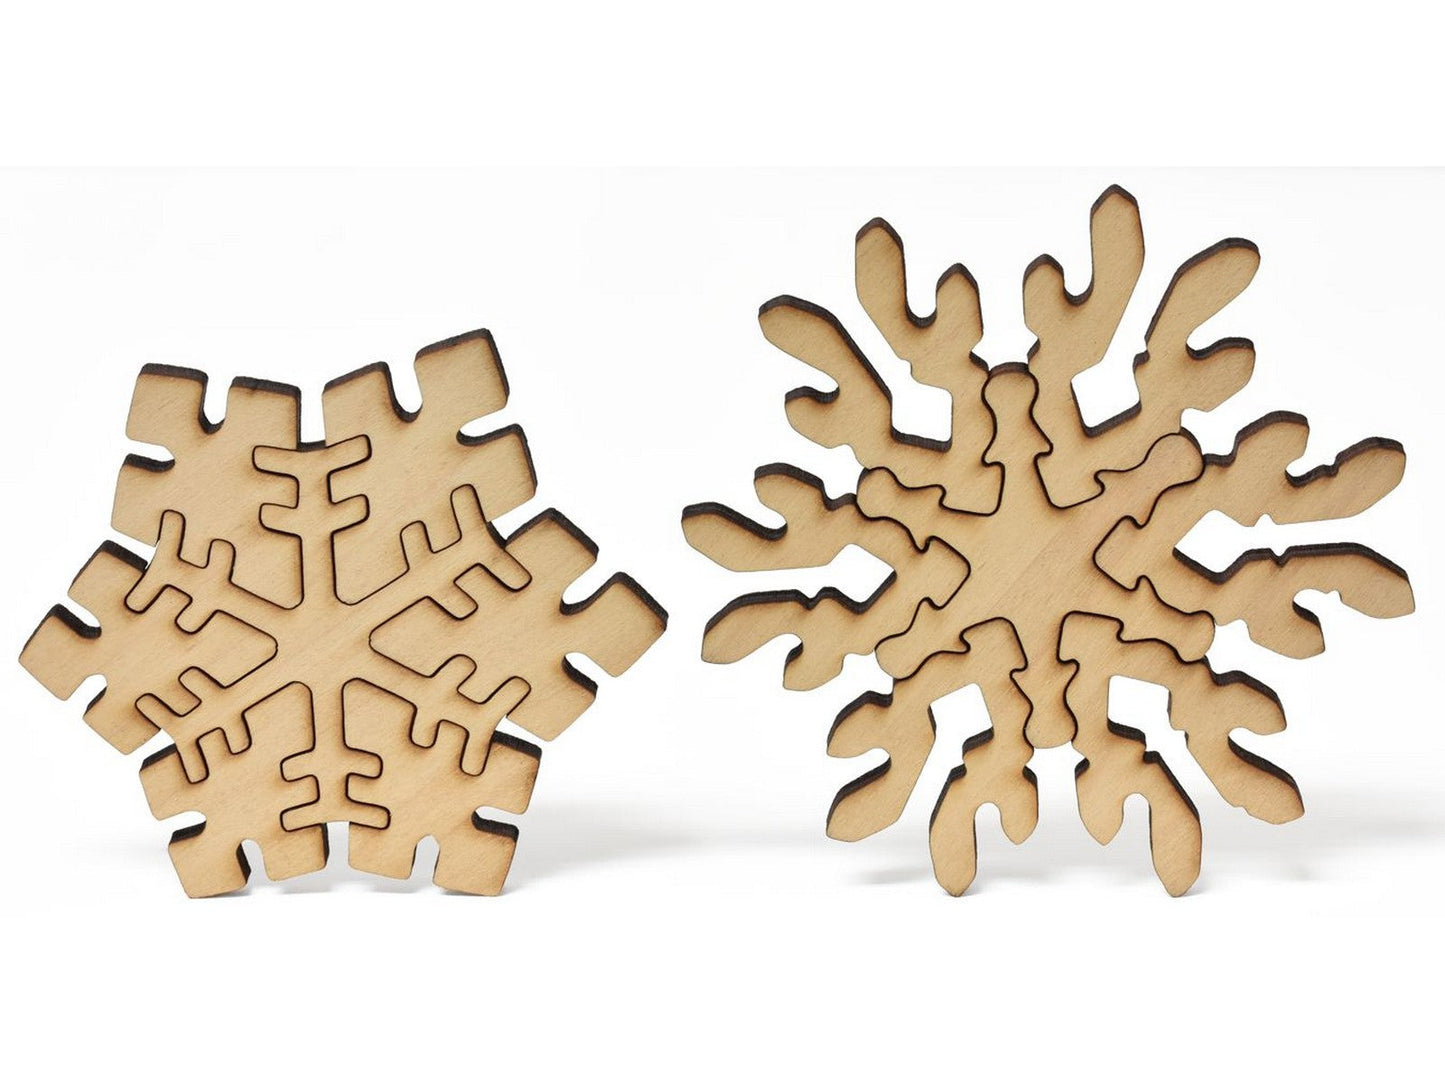 A closeup of pieces in the shape of multi-piece snowflakes.